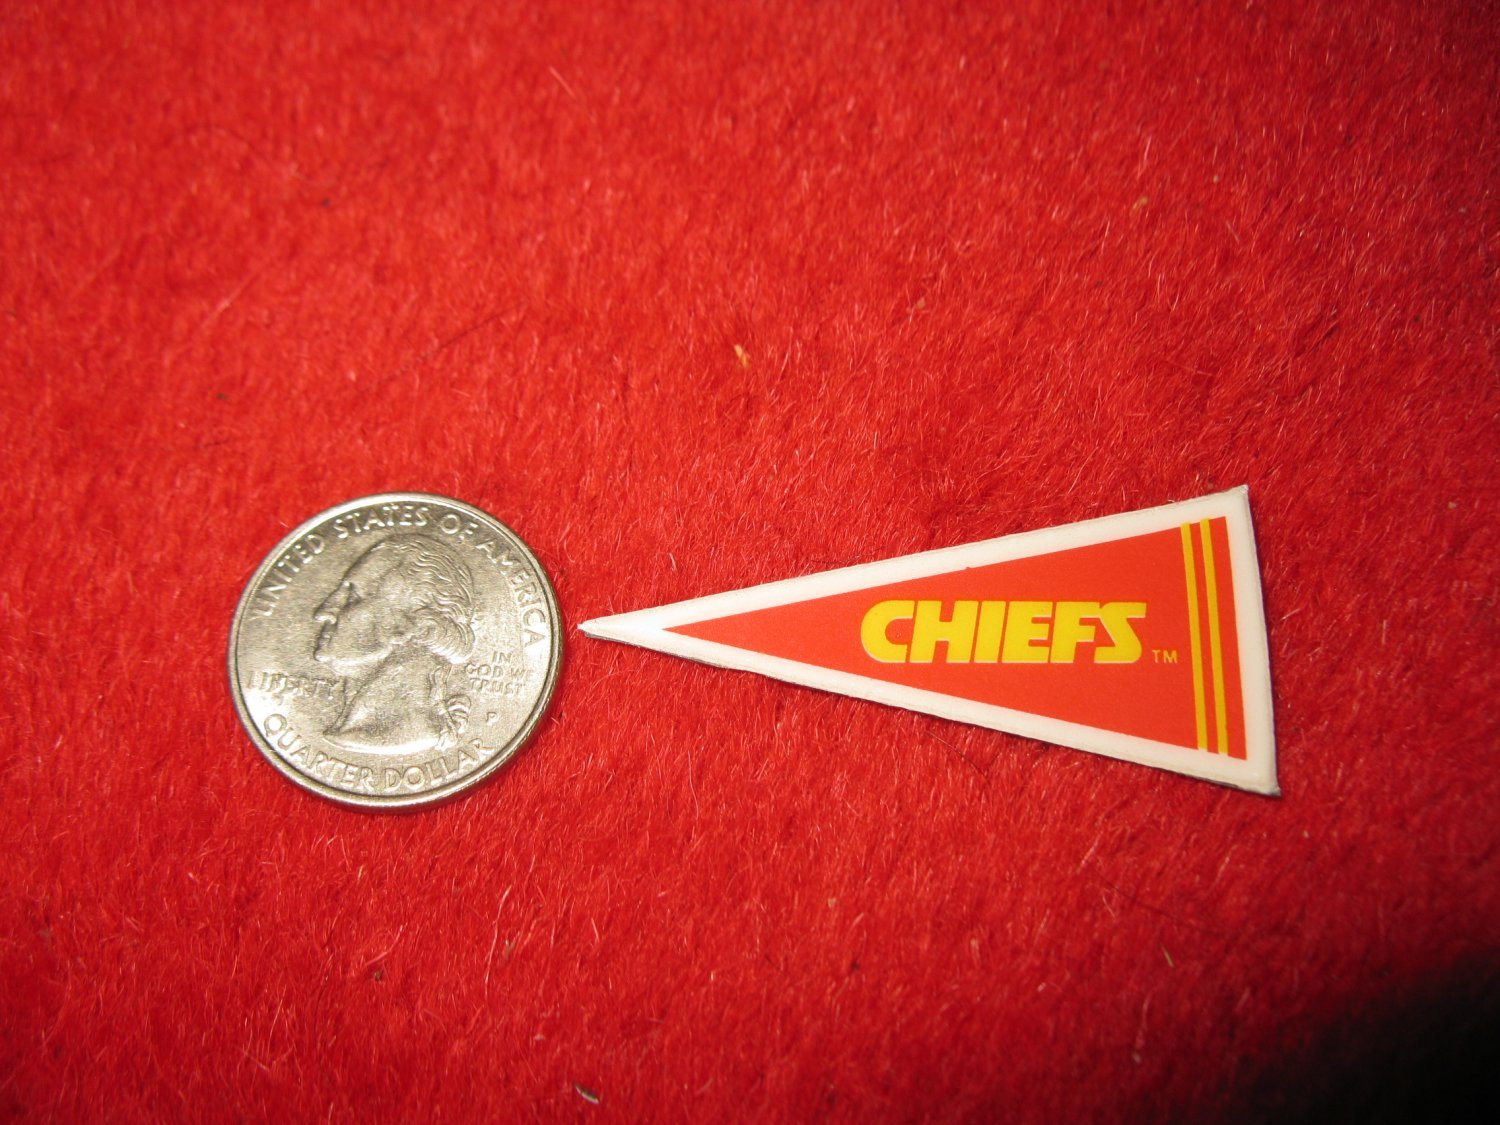 Primary image for 198o's NFL Football Pennant Refrigerator Magnet: Chiefs